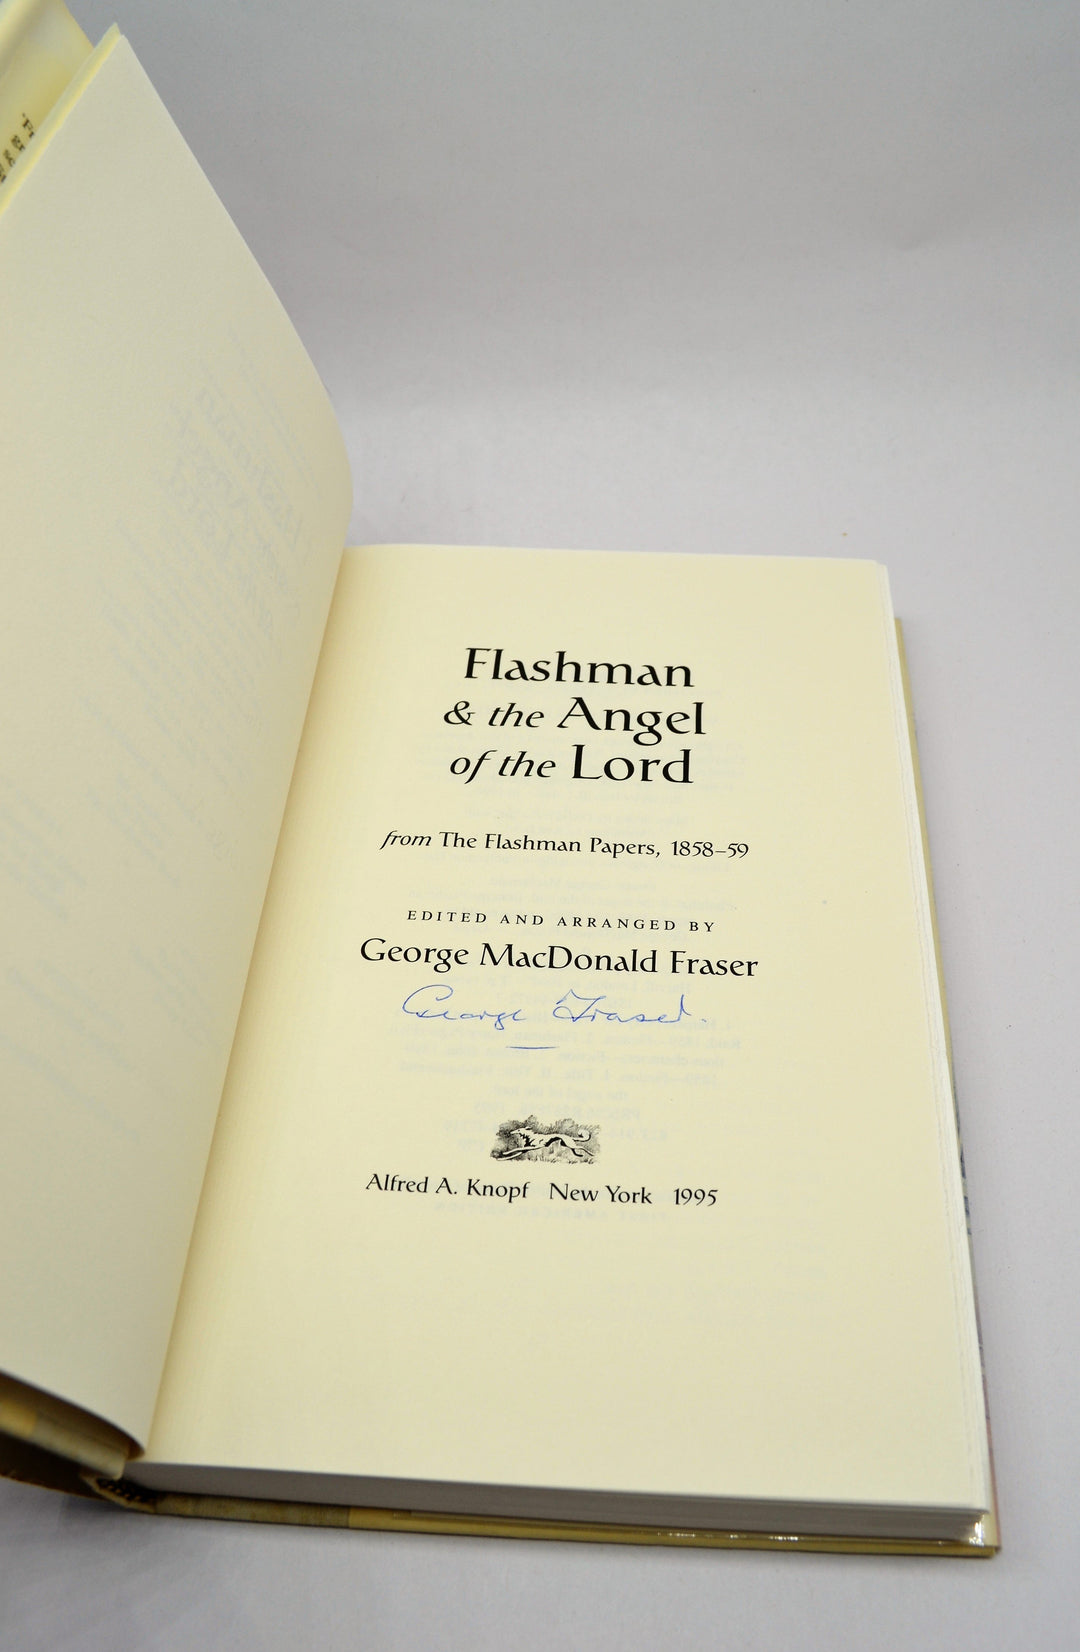 MacDonald Fraser, George - Flashman and the Angel of the Lord - SIGNED | back cover